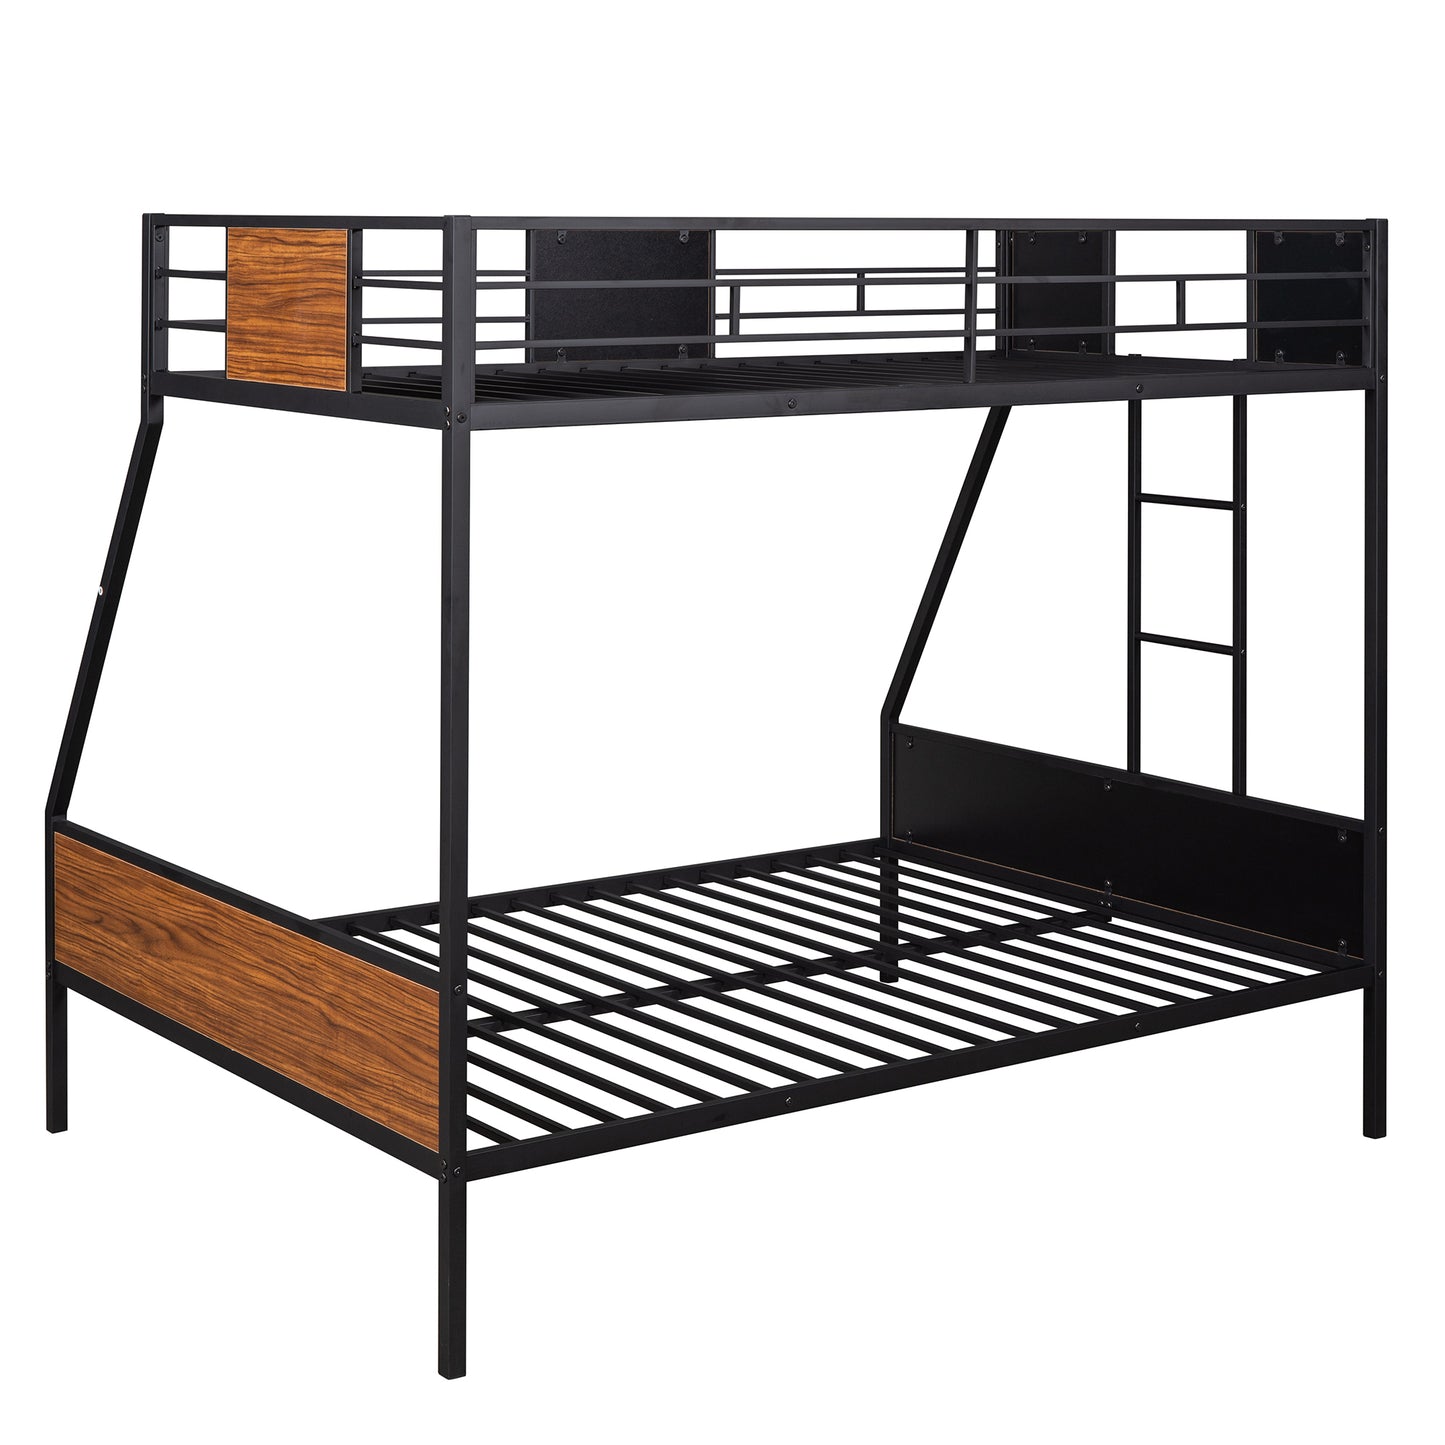 Kai Twin-over-full bunk bed